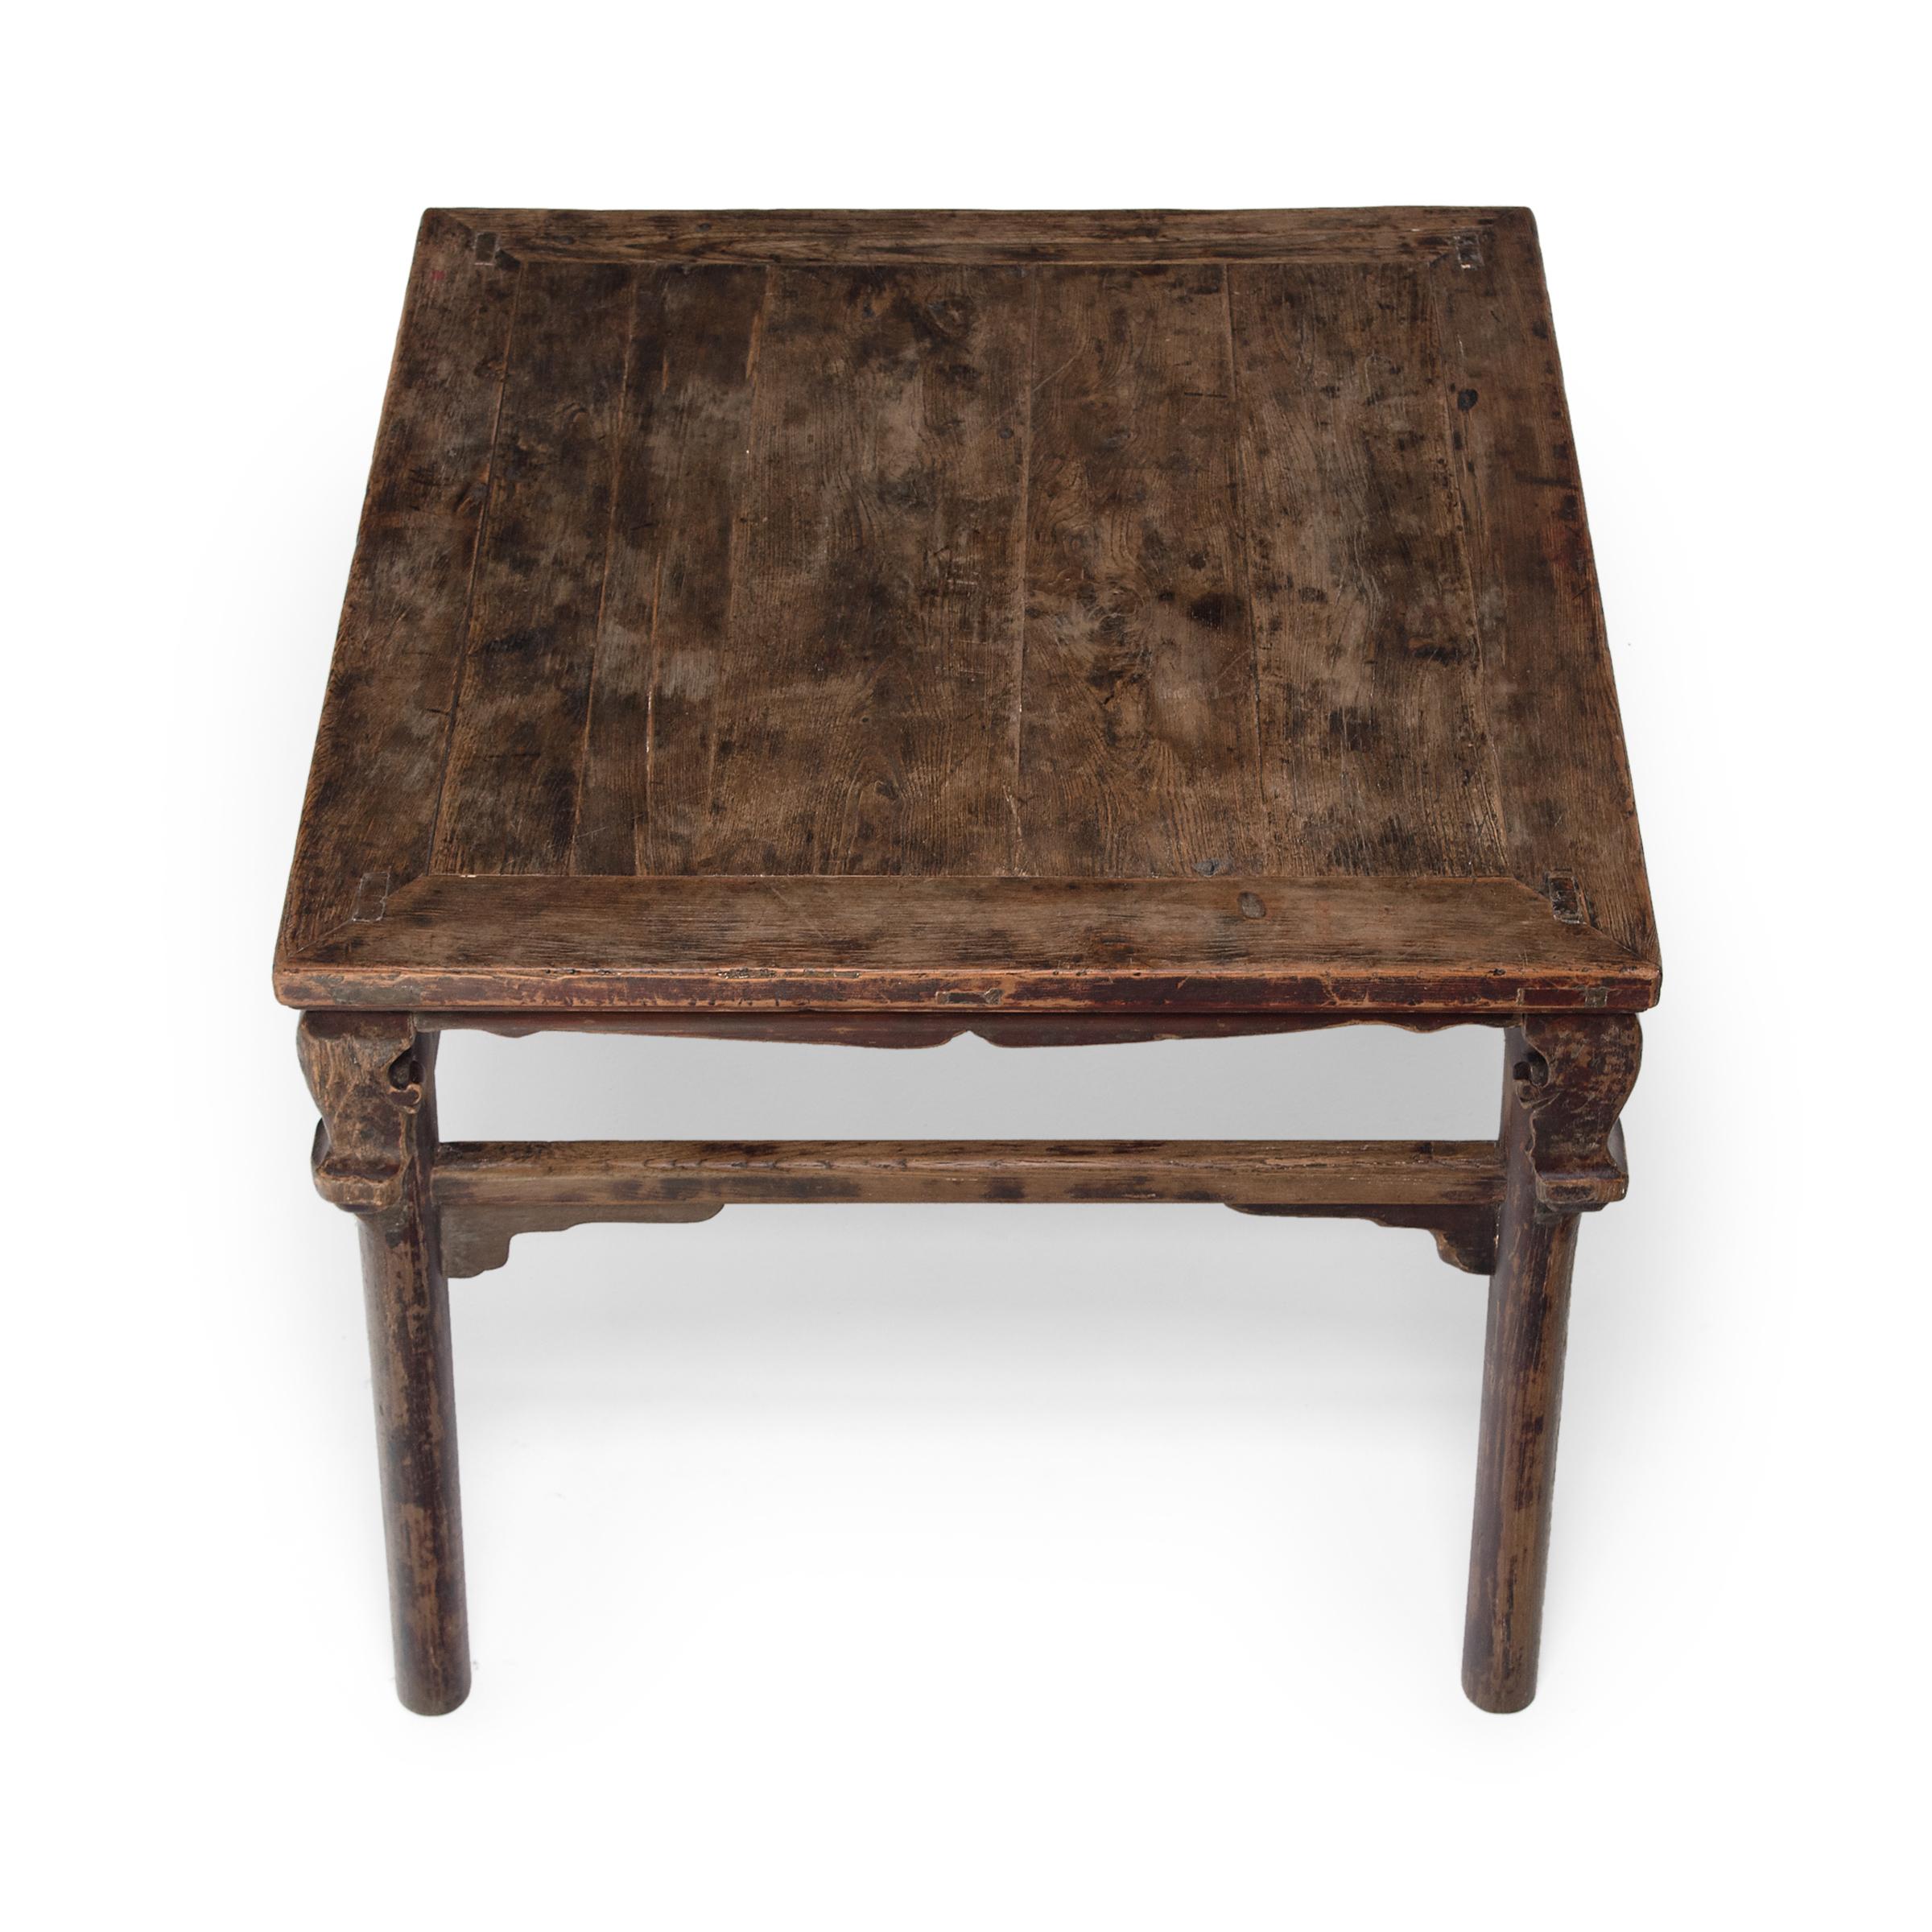 19th Century Chinese Square Display Table with Scroll Corners, circa 1850 For Sale